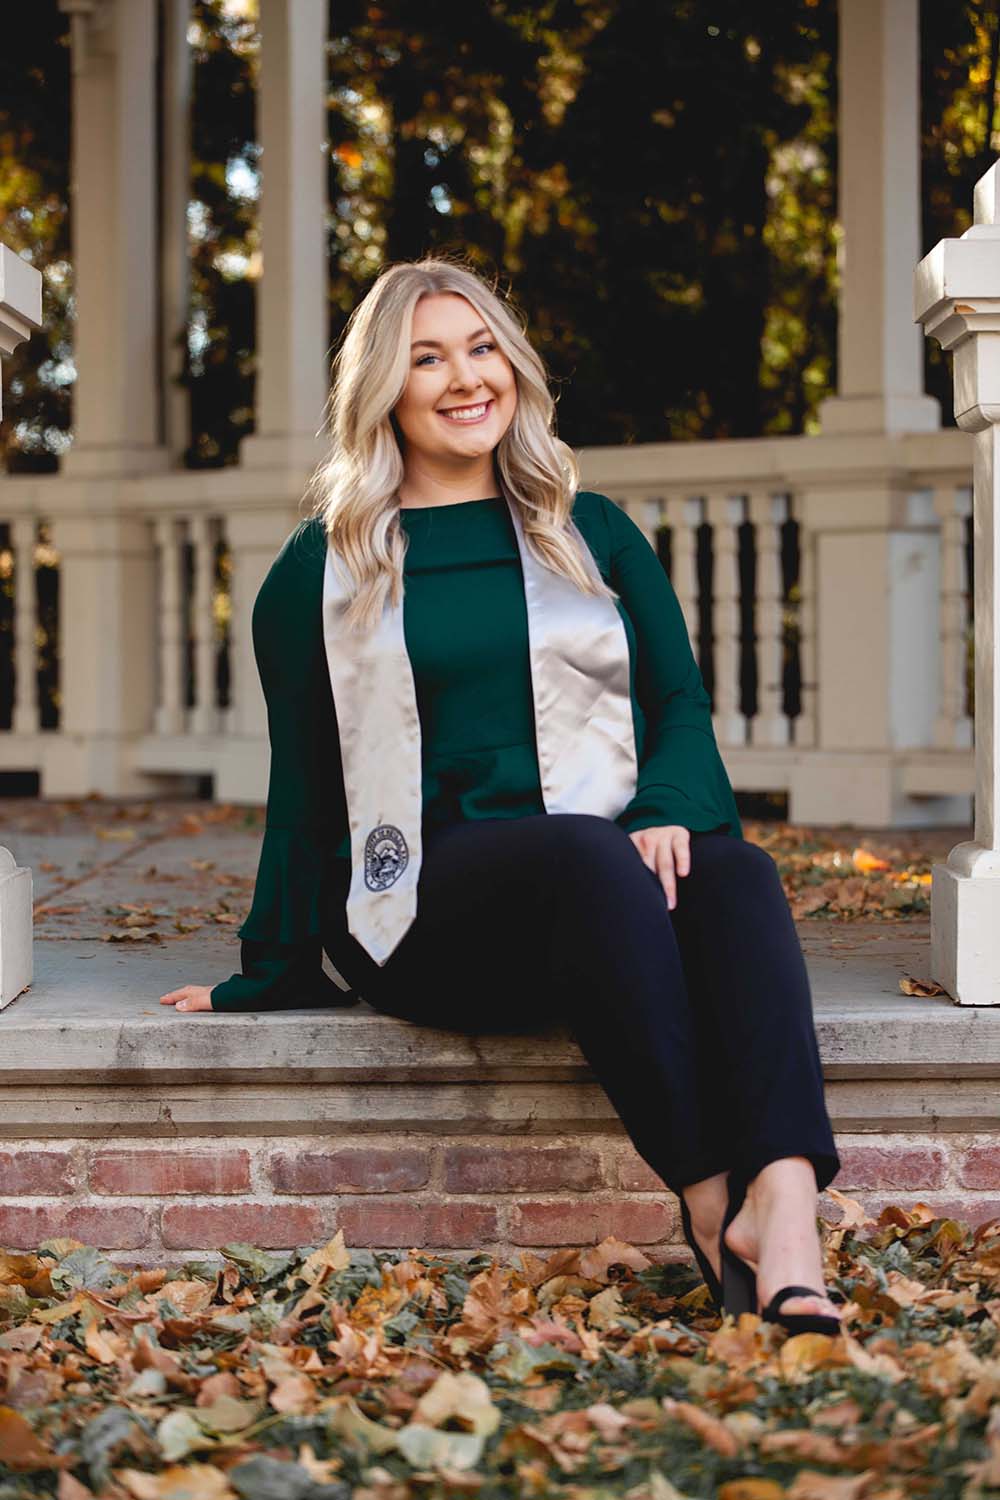 Mariah Zinn sits and poses for a photo in the University of Nevada, Reno Honor Court